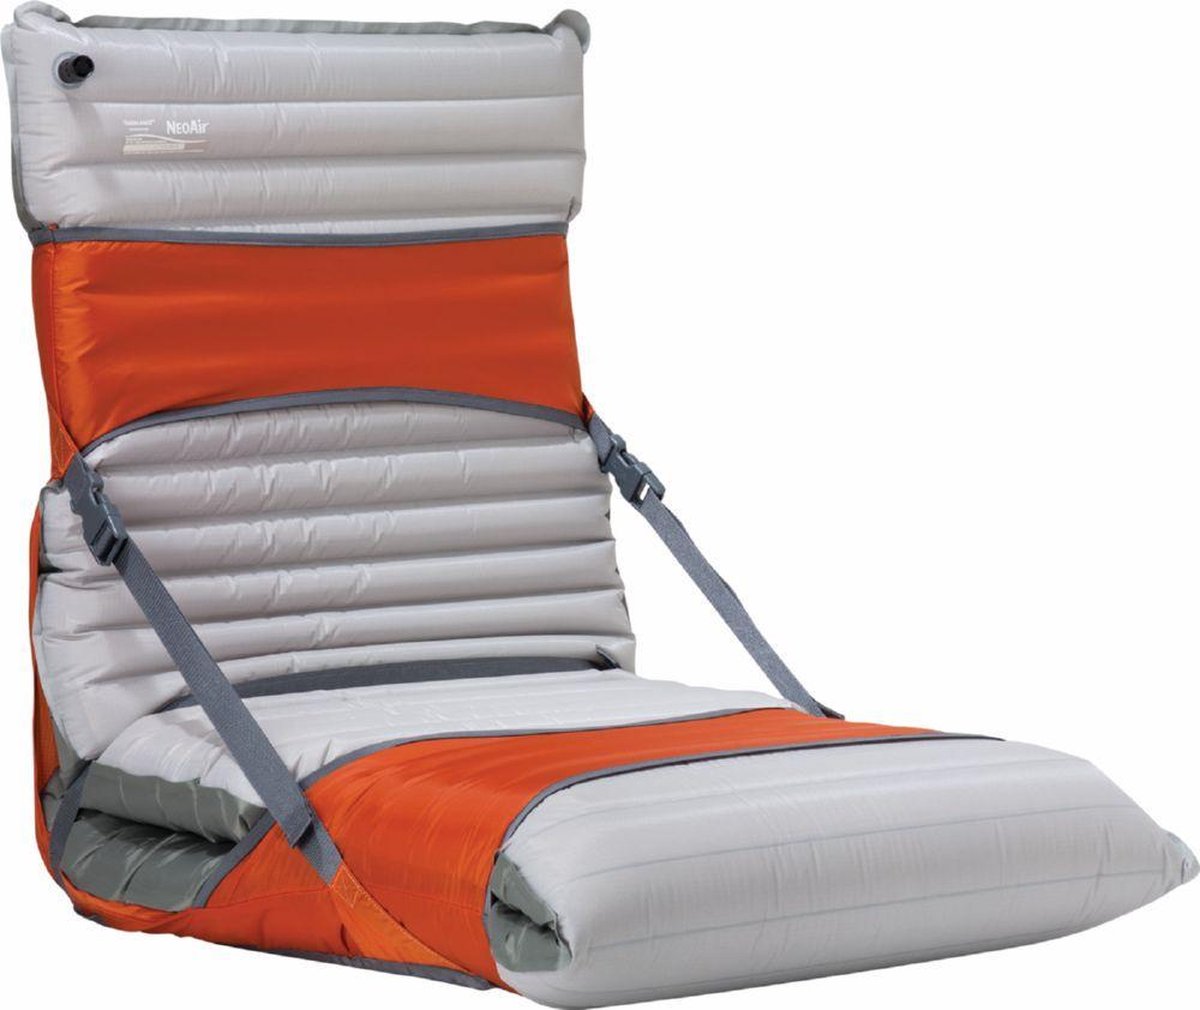 New ThermaRest Chair kit 20 Tomato NS